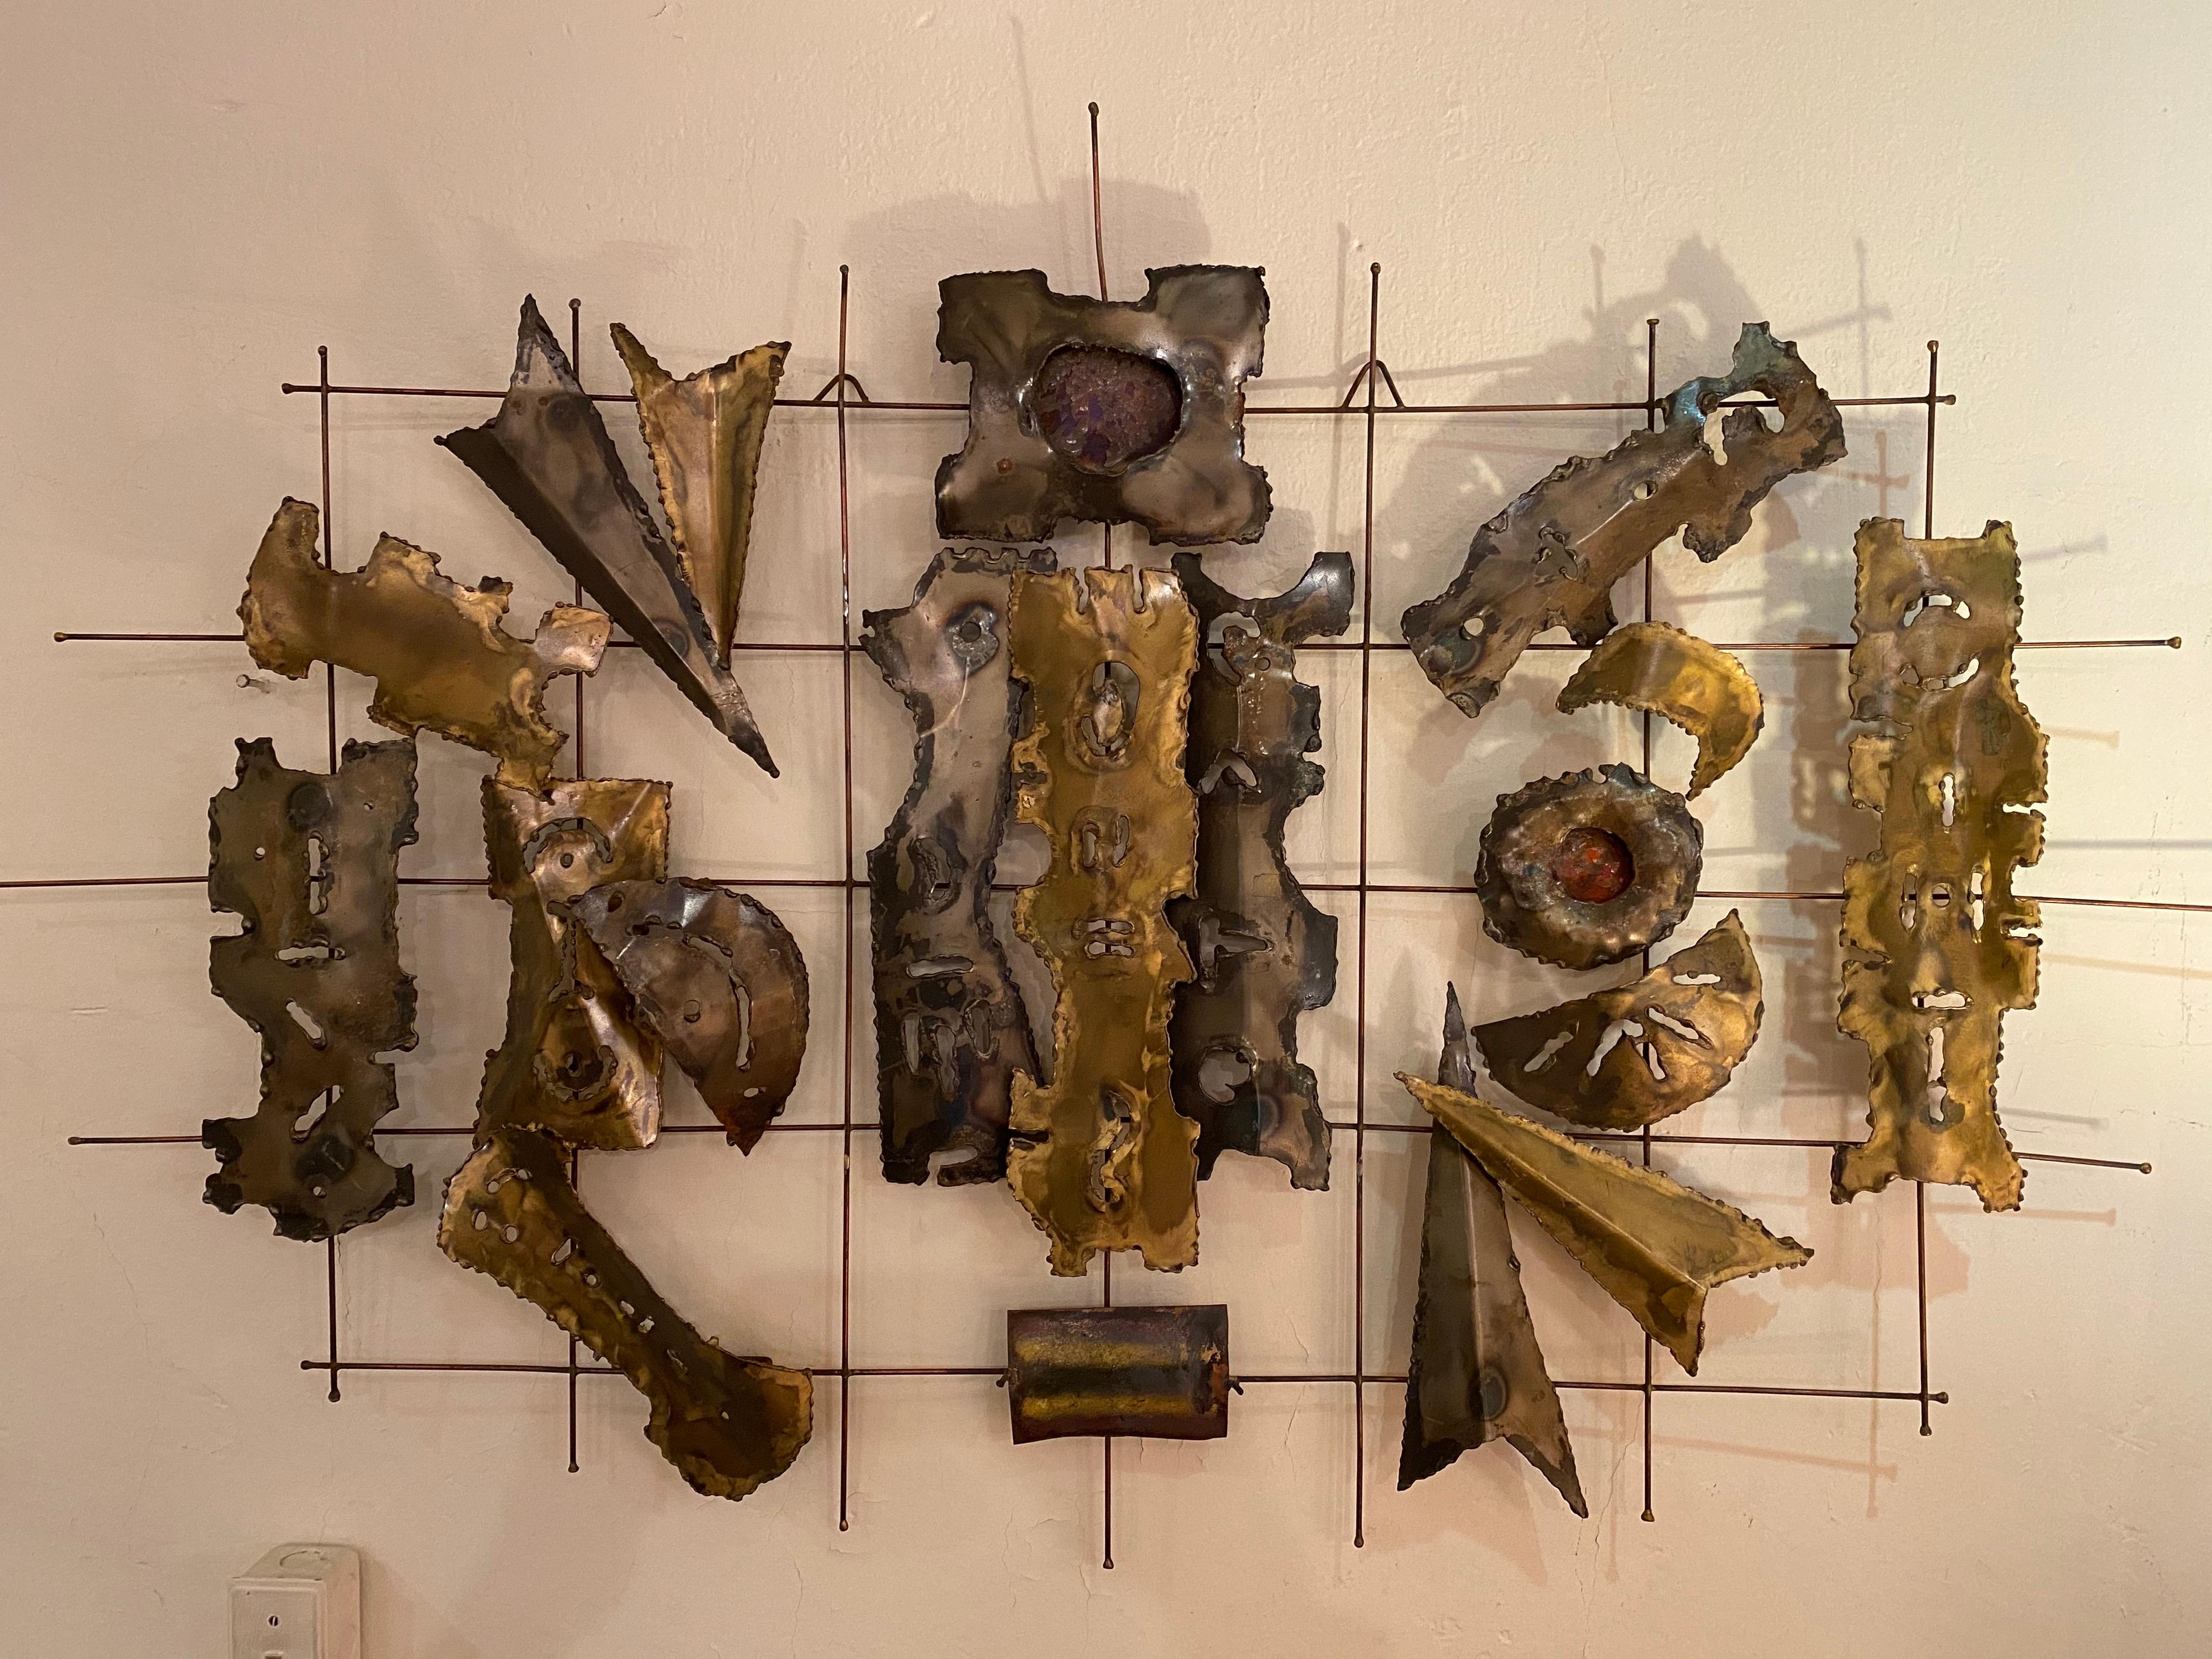 Mixed metal wall sculpture. Abstract cut out shapes mounted to a wire grid. Nice size and scale. Metals appear to be brass, copper with applied metal overlays.